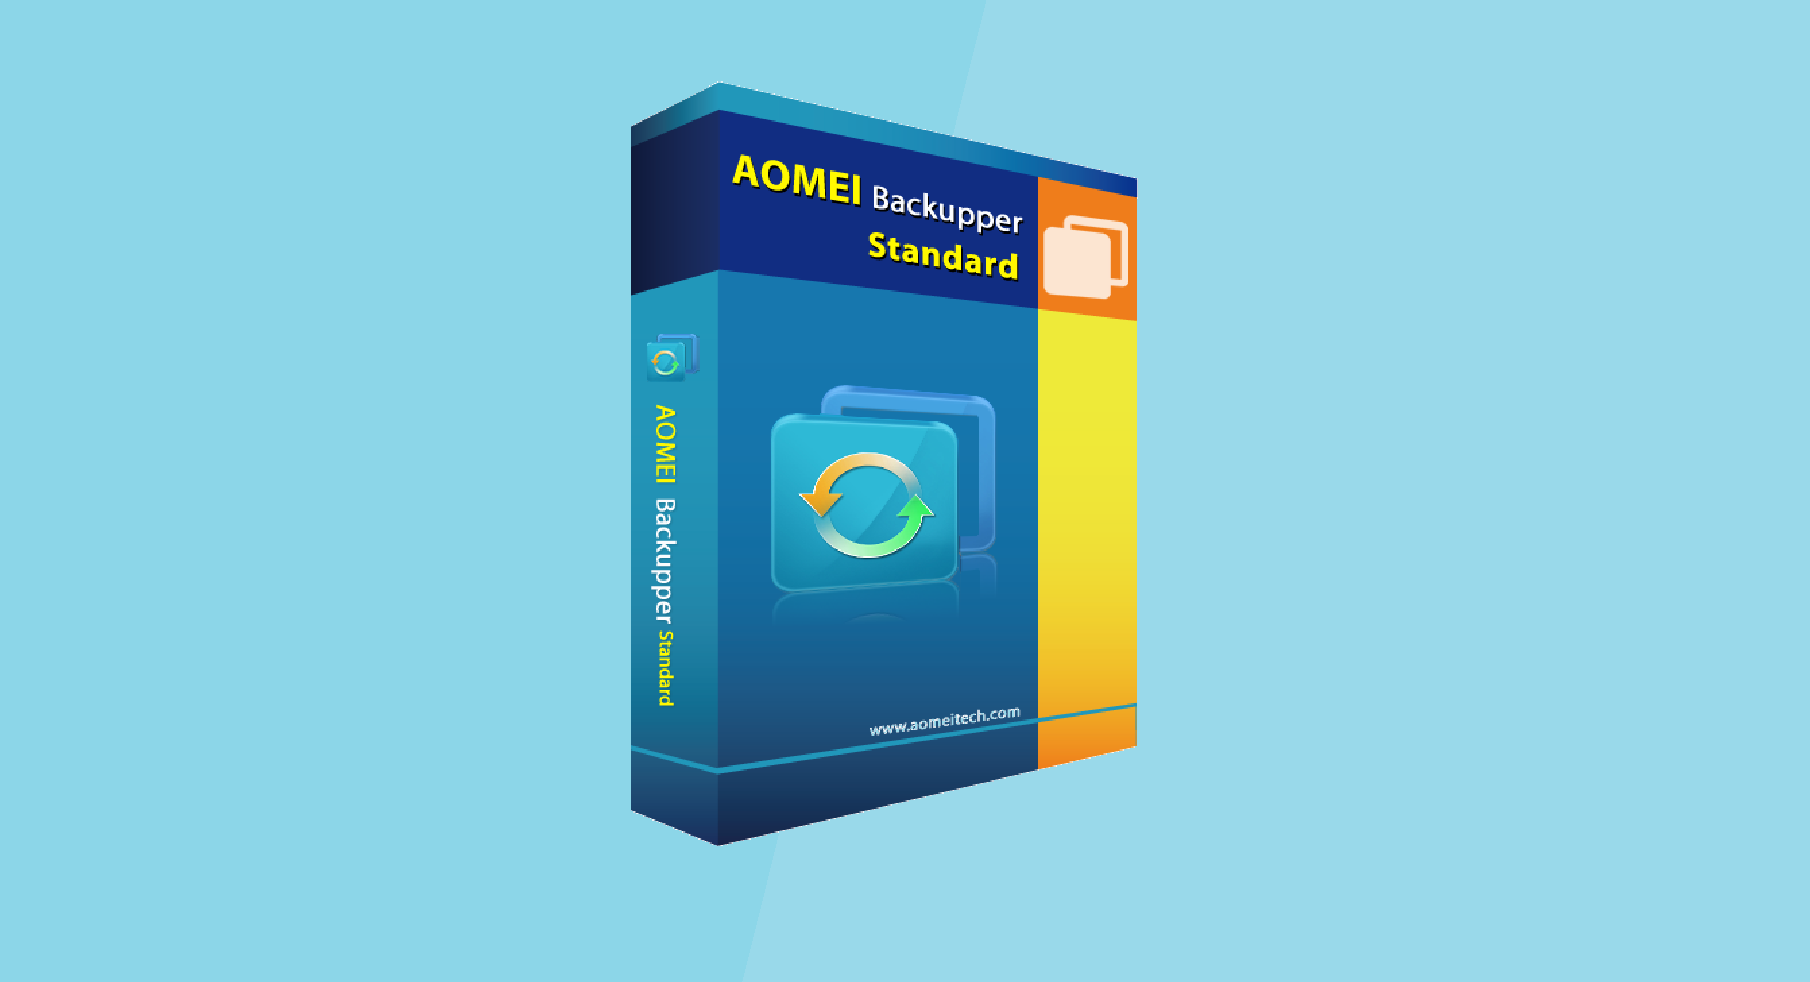 download the new AOMEI Backupper Professional 7.3.2